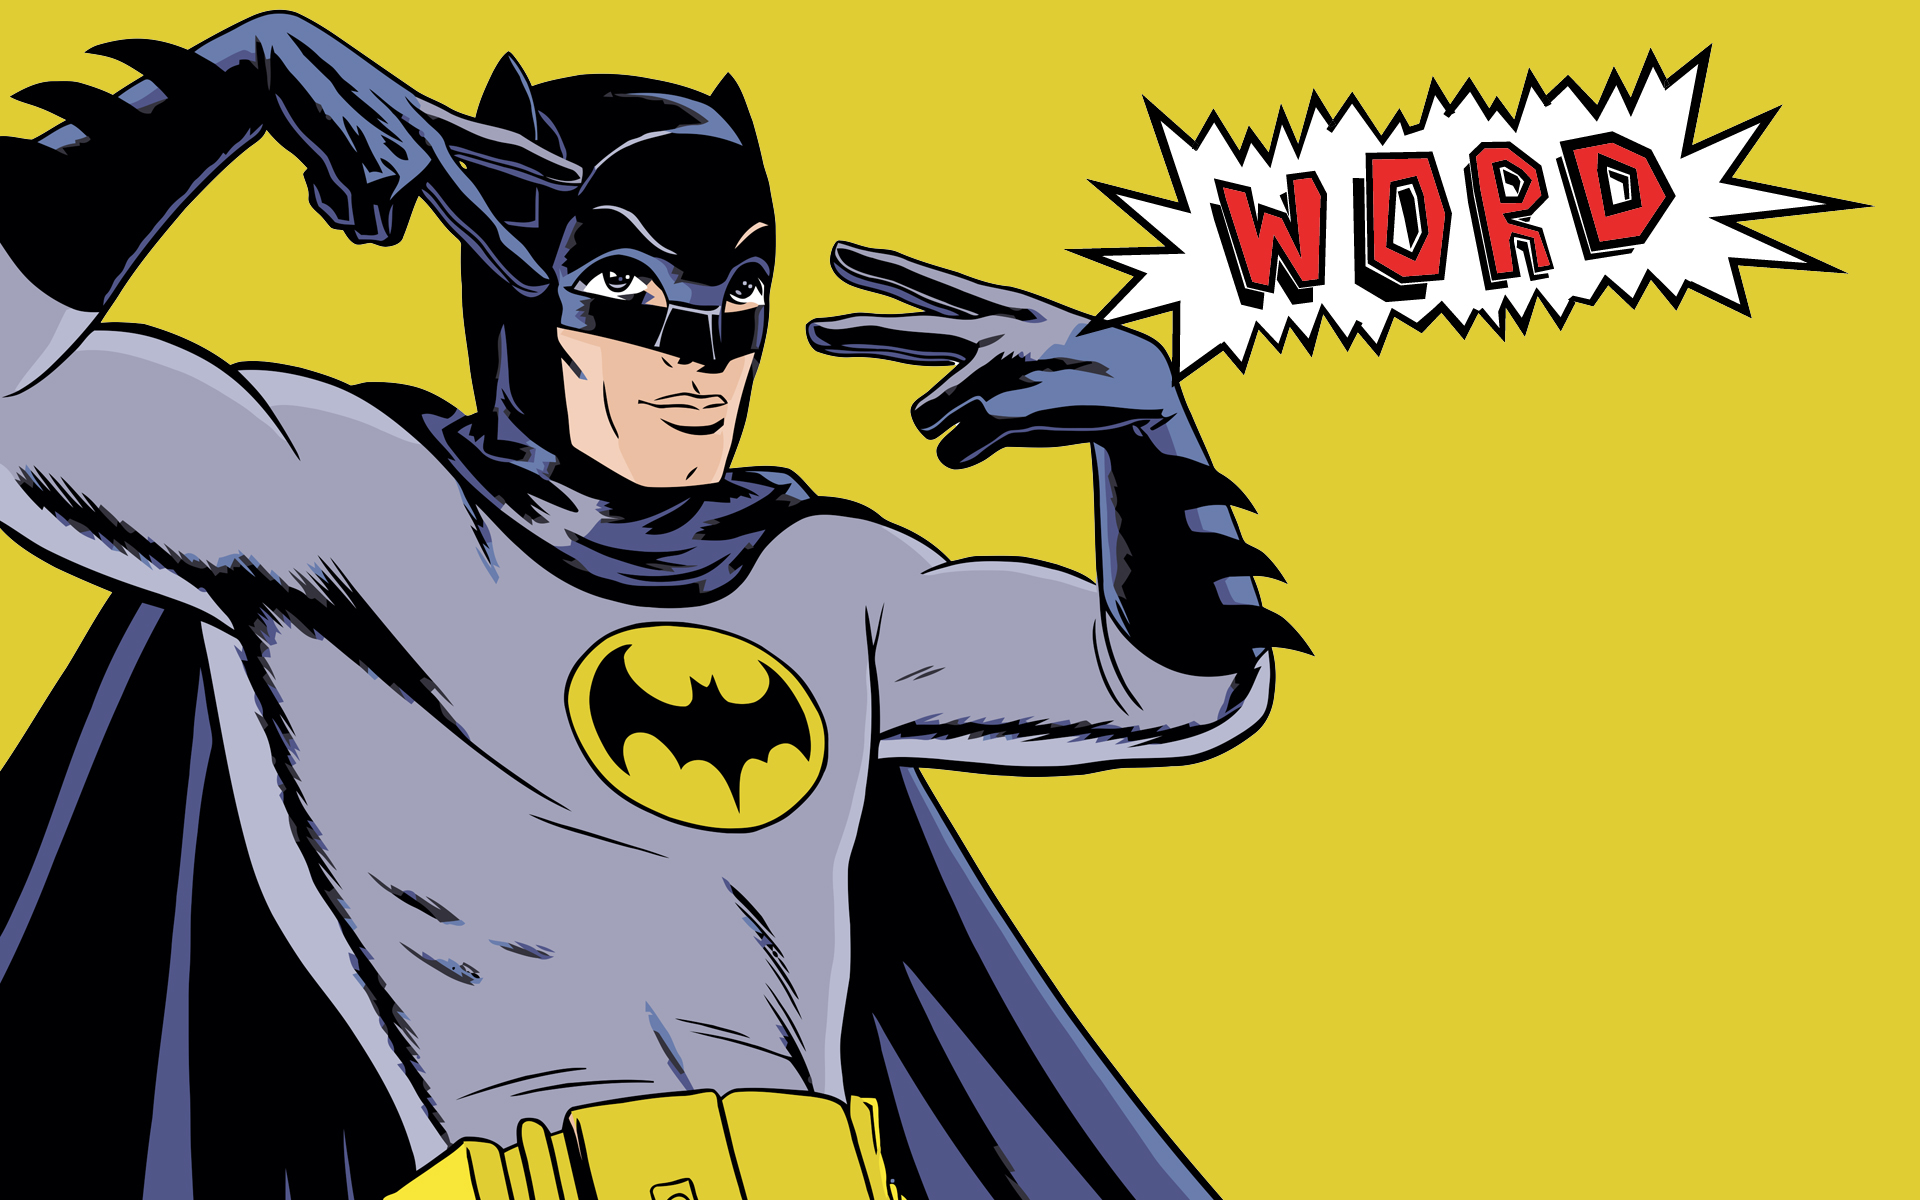  Disease Why Batman is the best superhero for the chronically ill